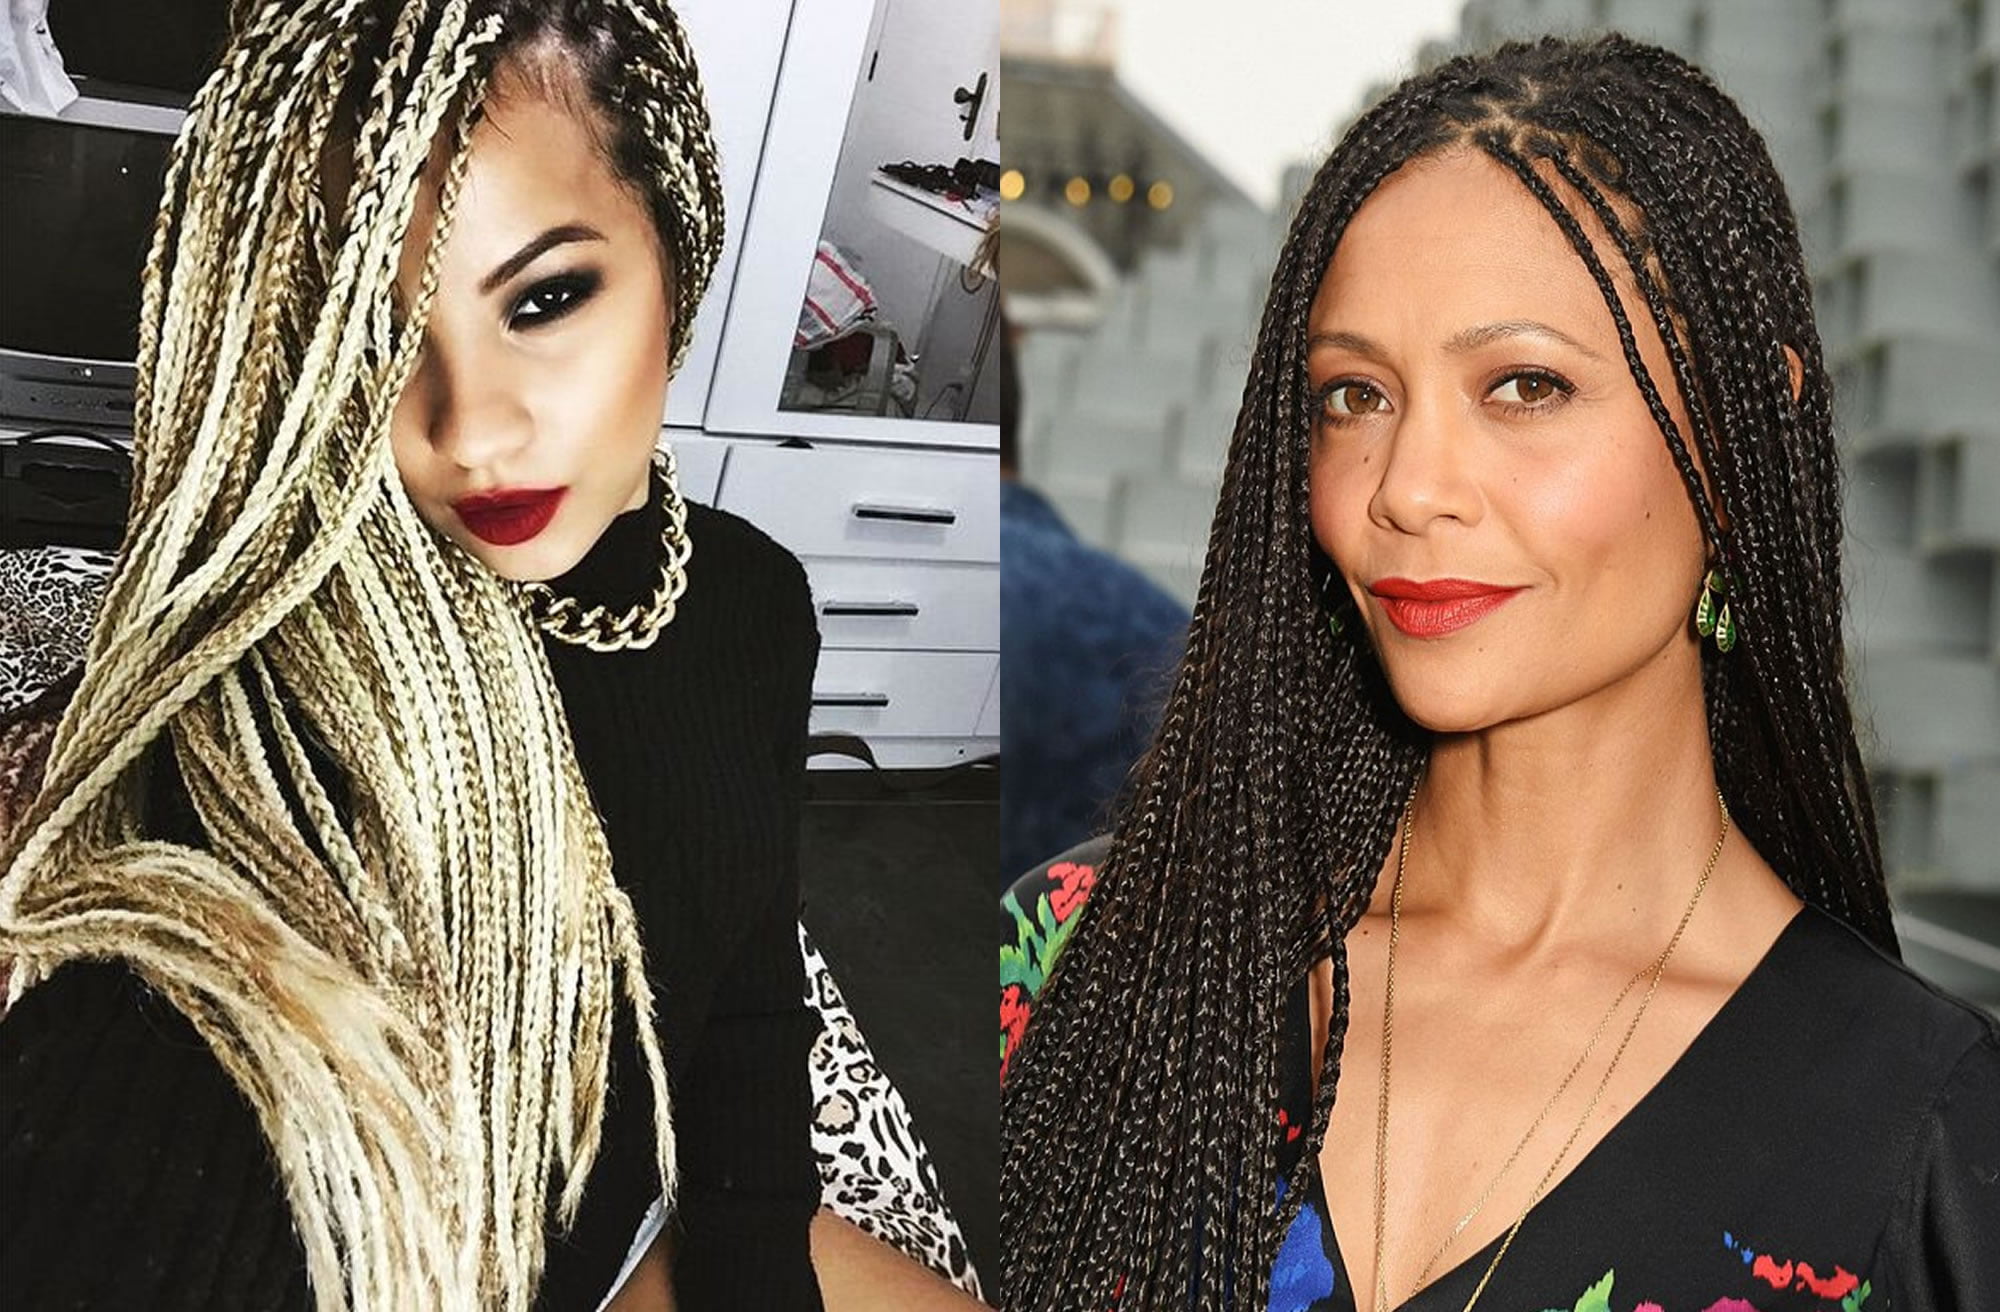 3. 30 Black Braided Hairstyles You Can Try for a Chic Summer Look - wide 6